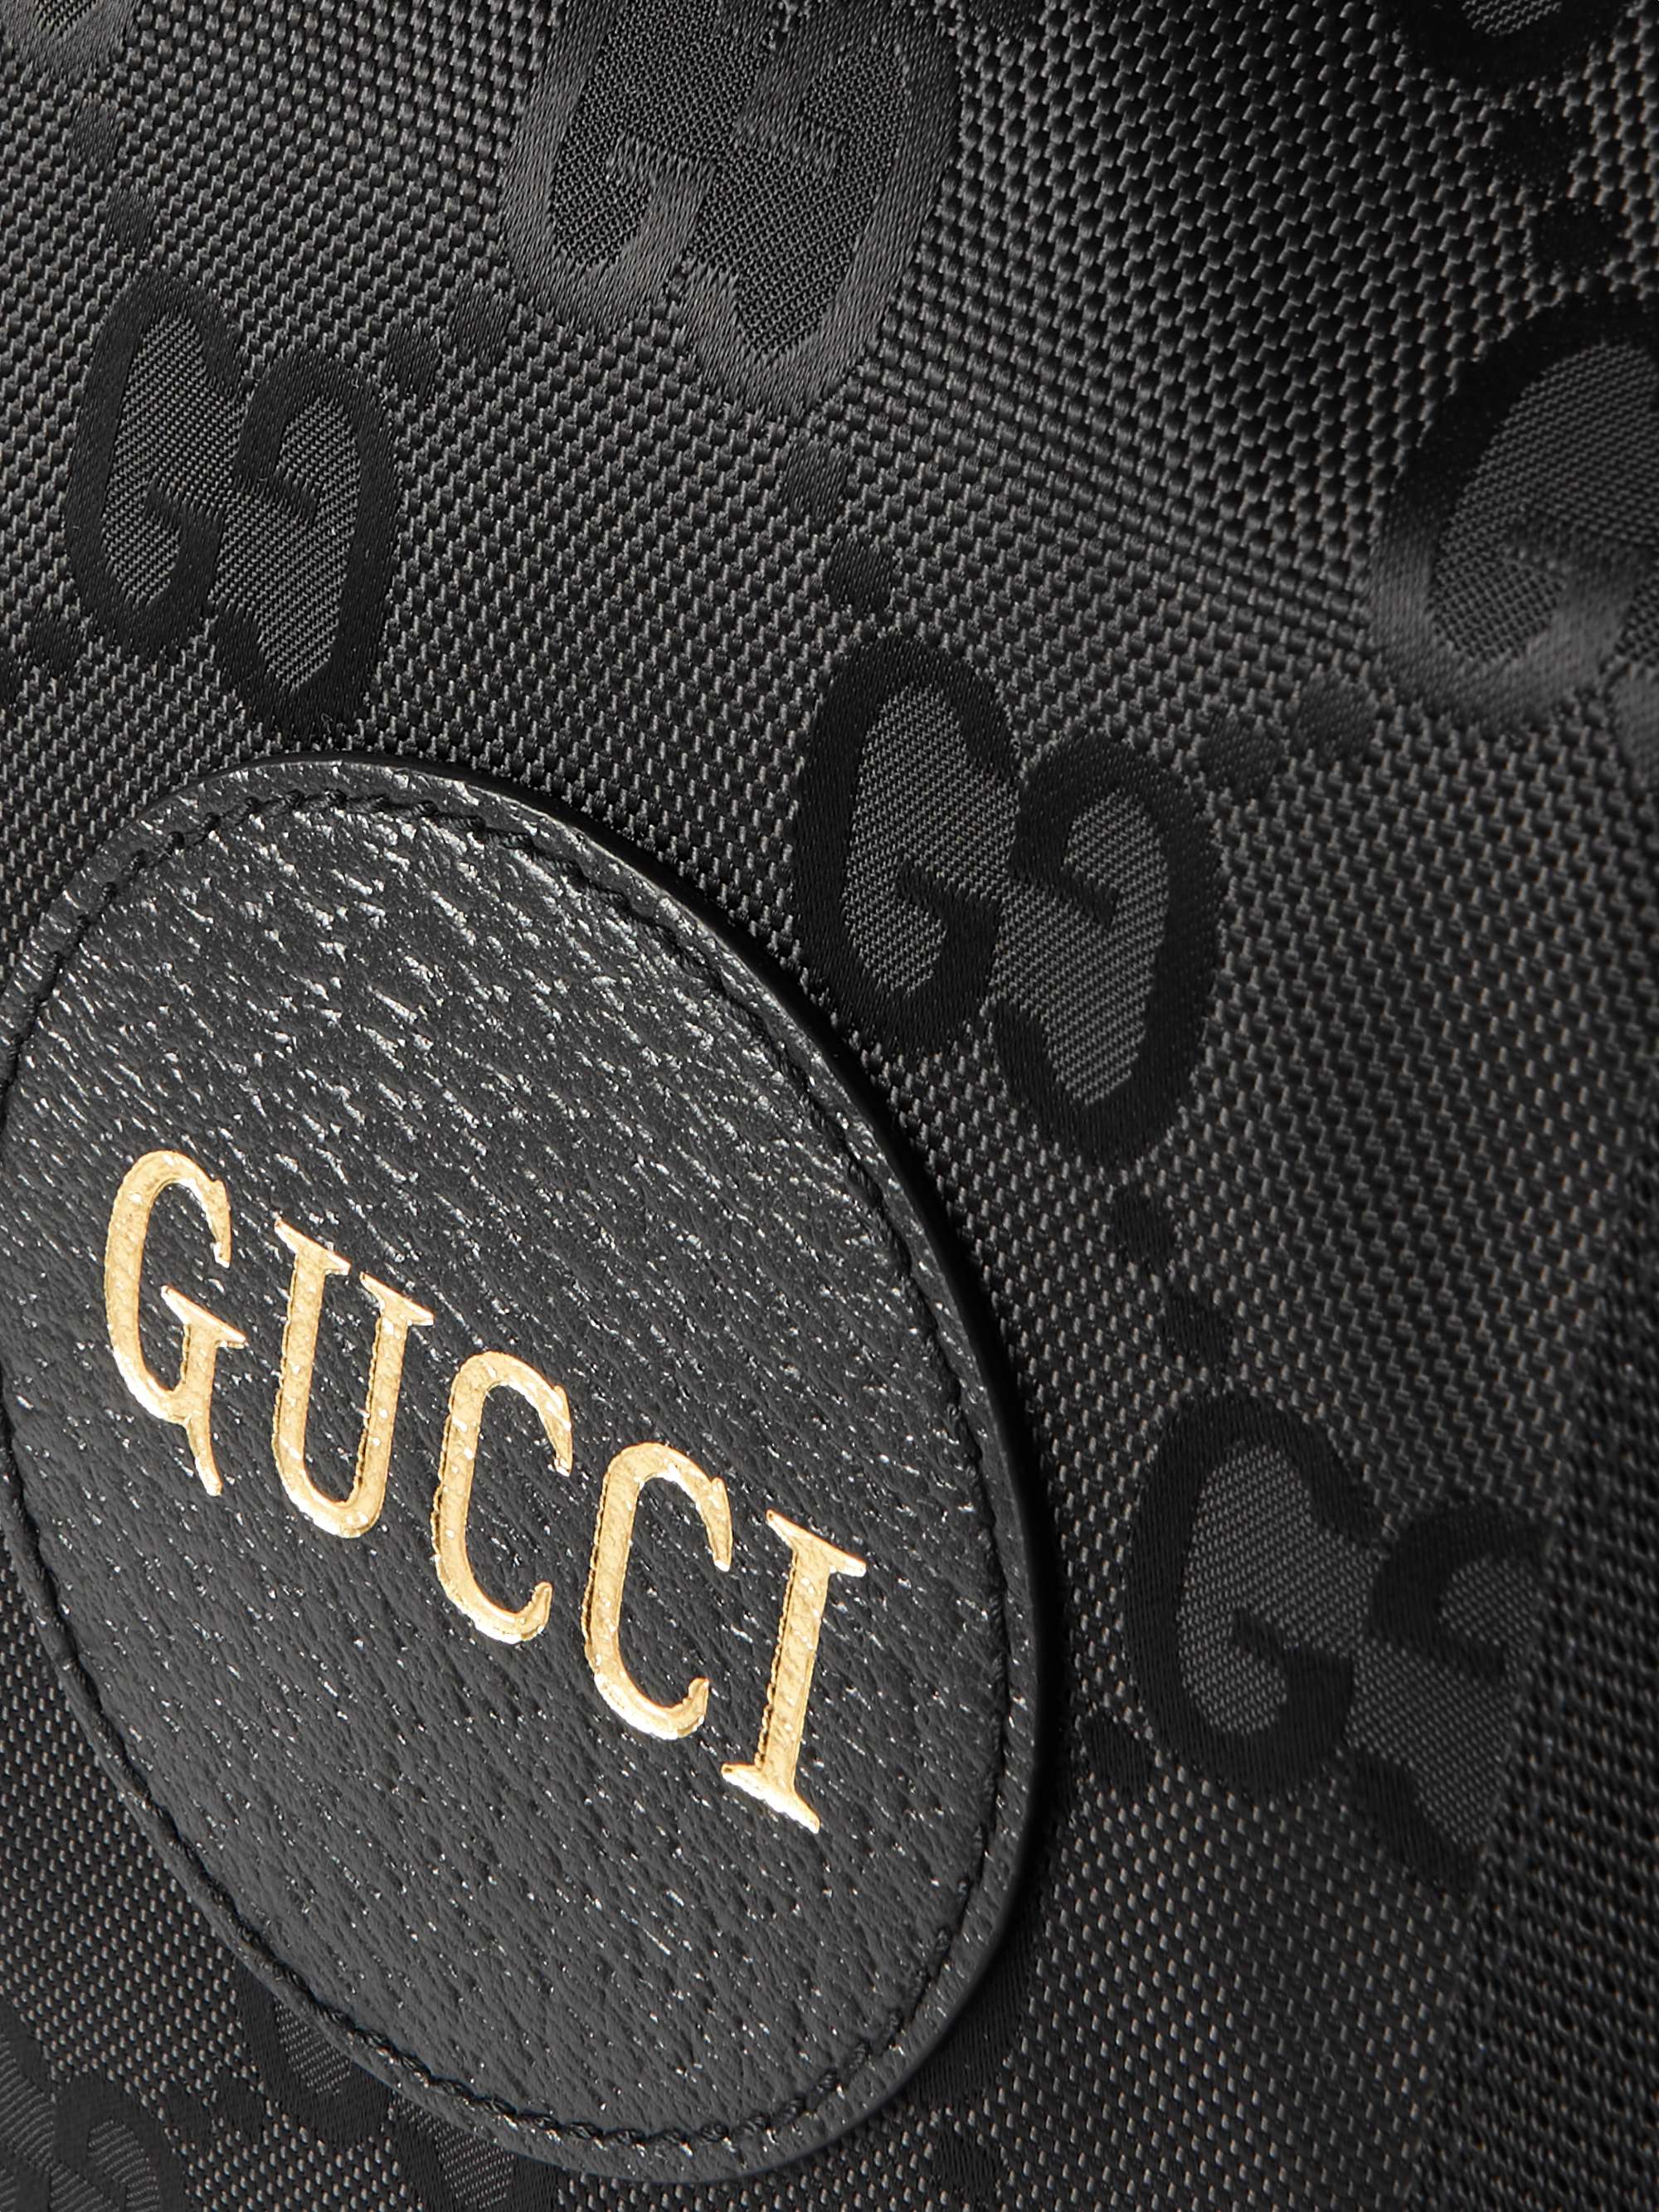 GUCCI Off the Grid Leather-Trimmed Monogrammed ECONYL Canvas Backpack